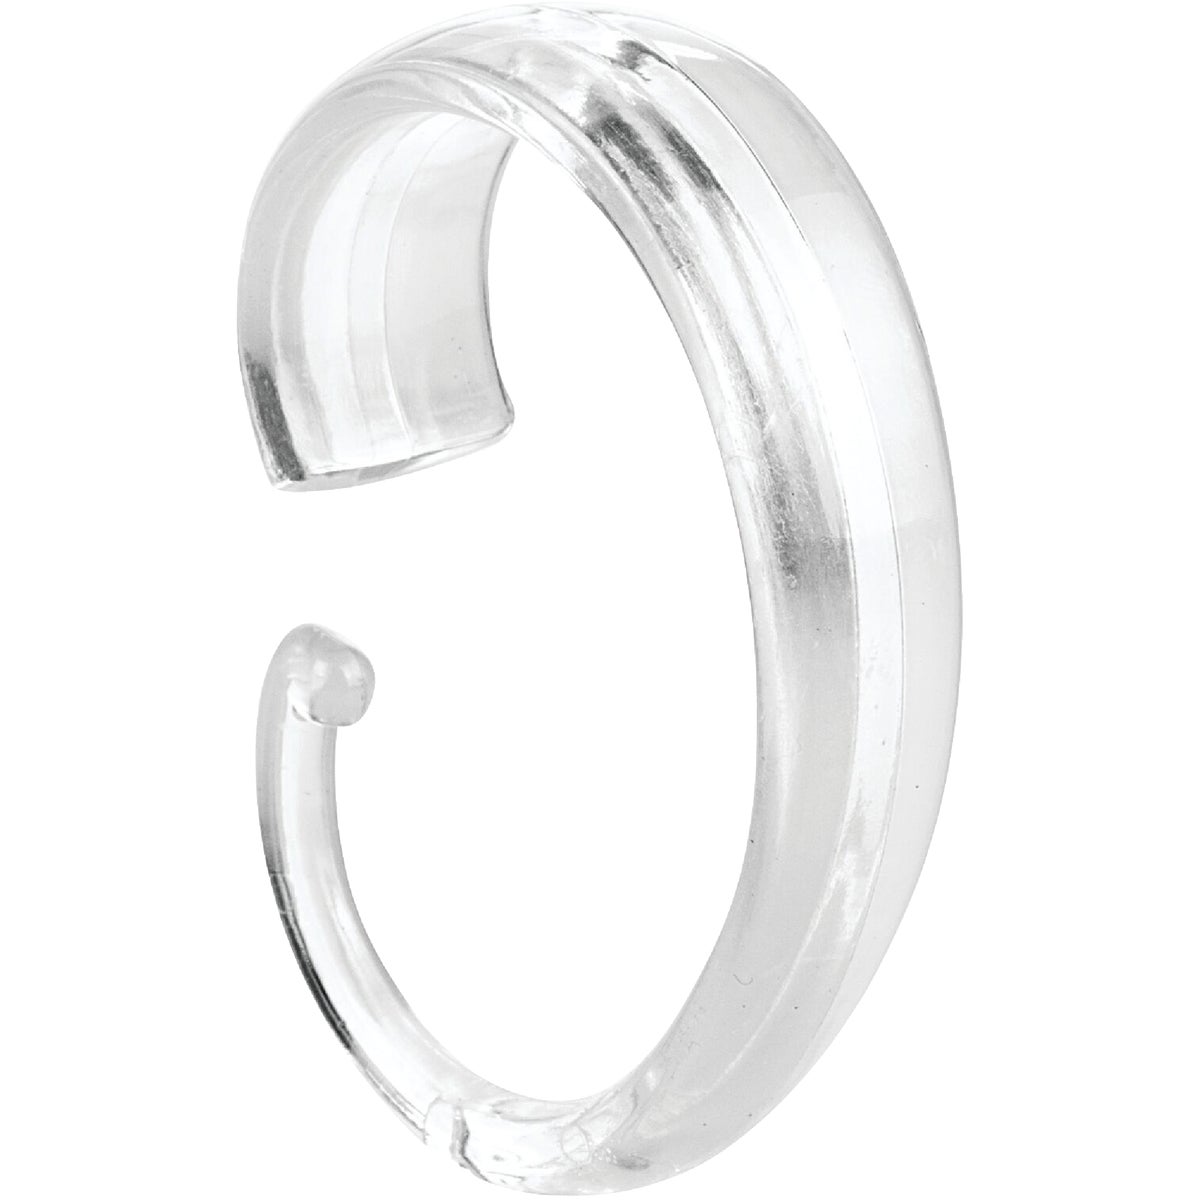 Item 636238, The InterDesign Clear Shower Curtain "C" Hooks are made to easily slide 